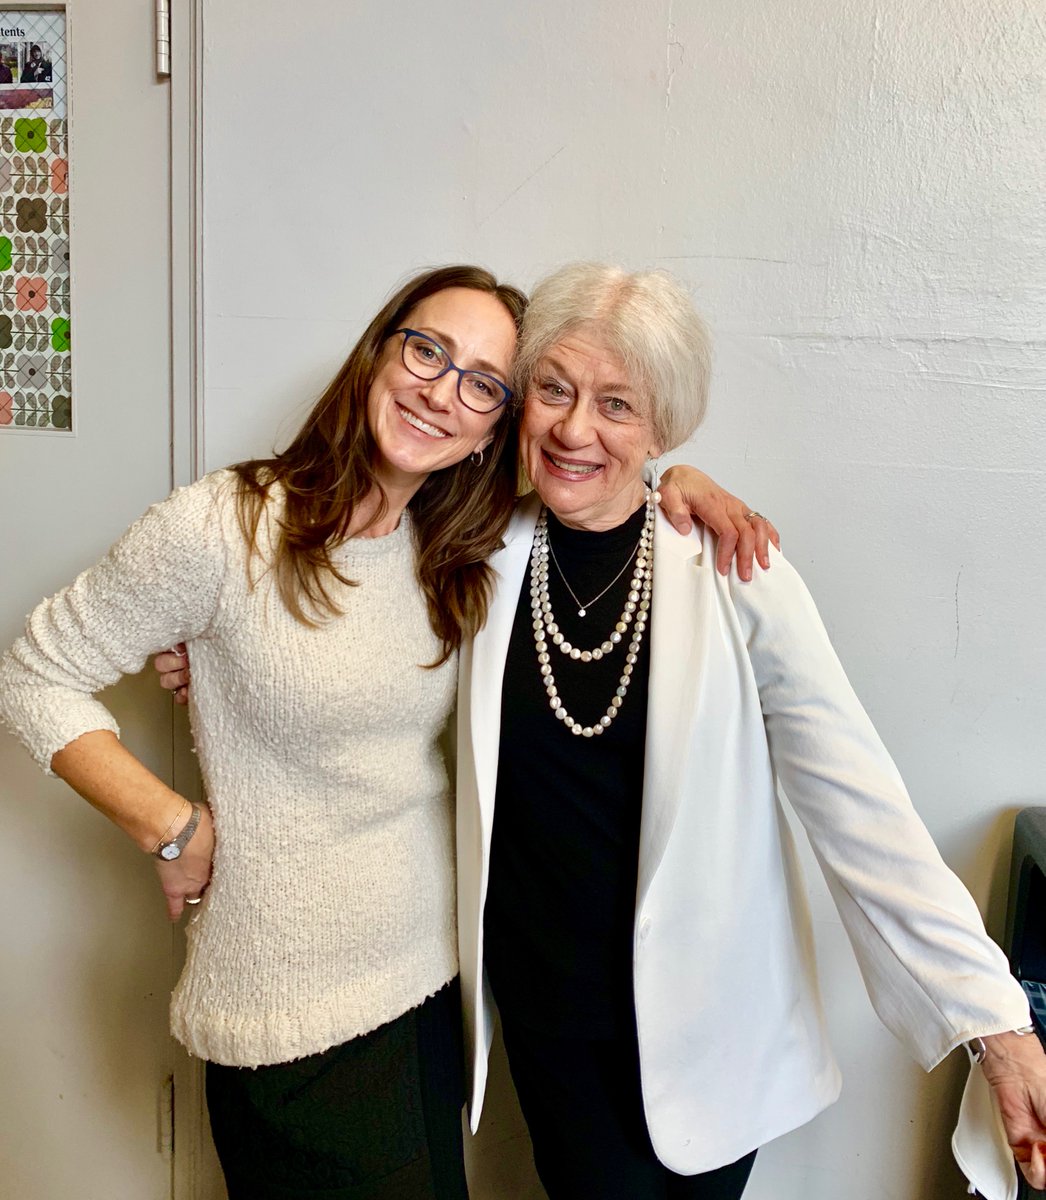 This afternoon, Community High School (CHS) English teacher, CET star and forum leader Judith DeWoskin announced her retirement. In the conversation with her forum, she reminisced about room 303 — her corner room of 34 years — and offered optimism for the upcoming school year.